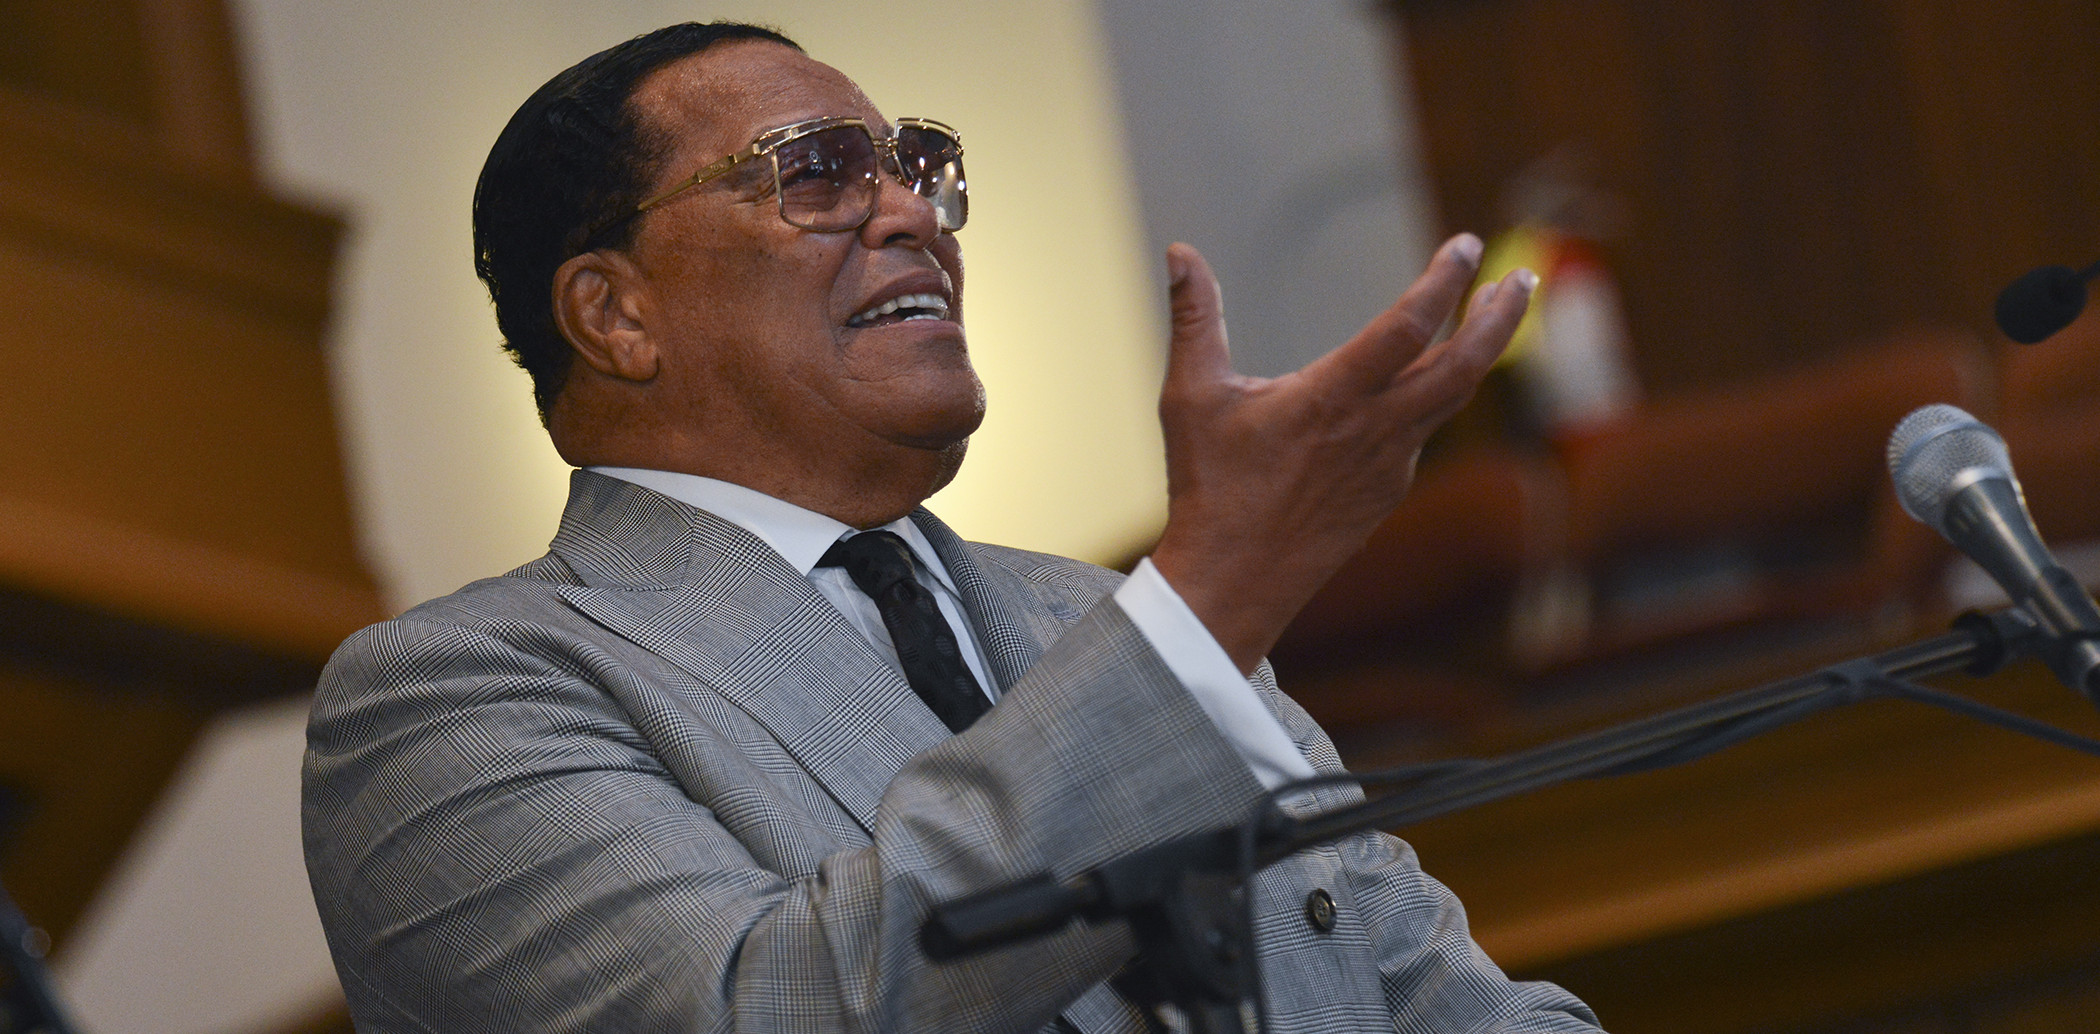 Farrakhan: “Justice or Else” March Just the Beginning